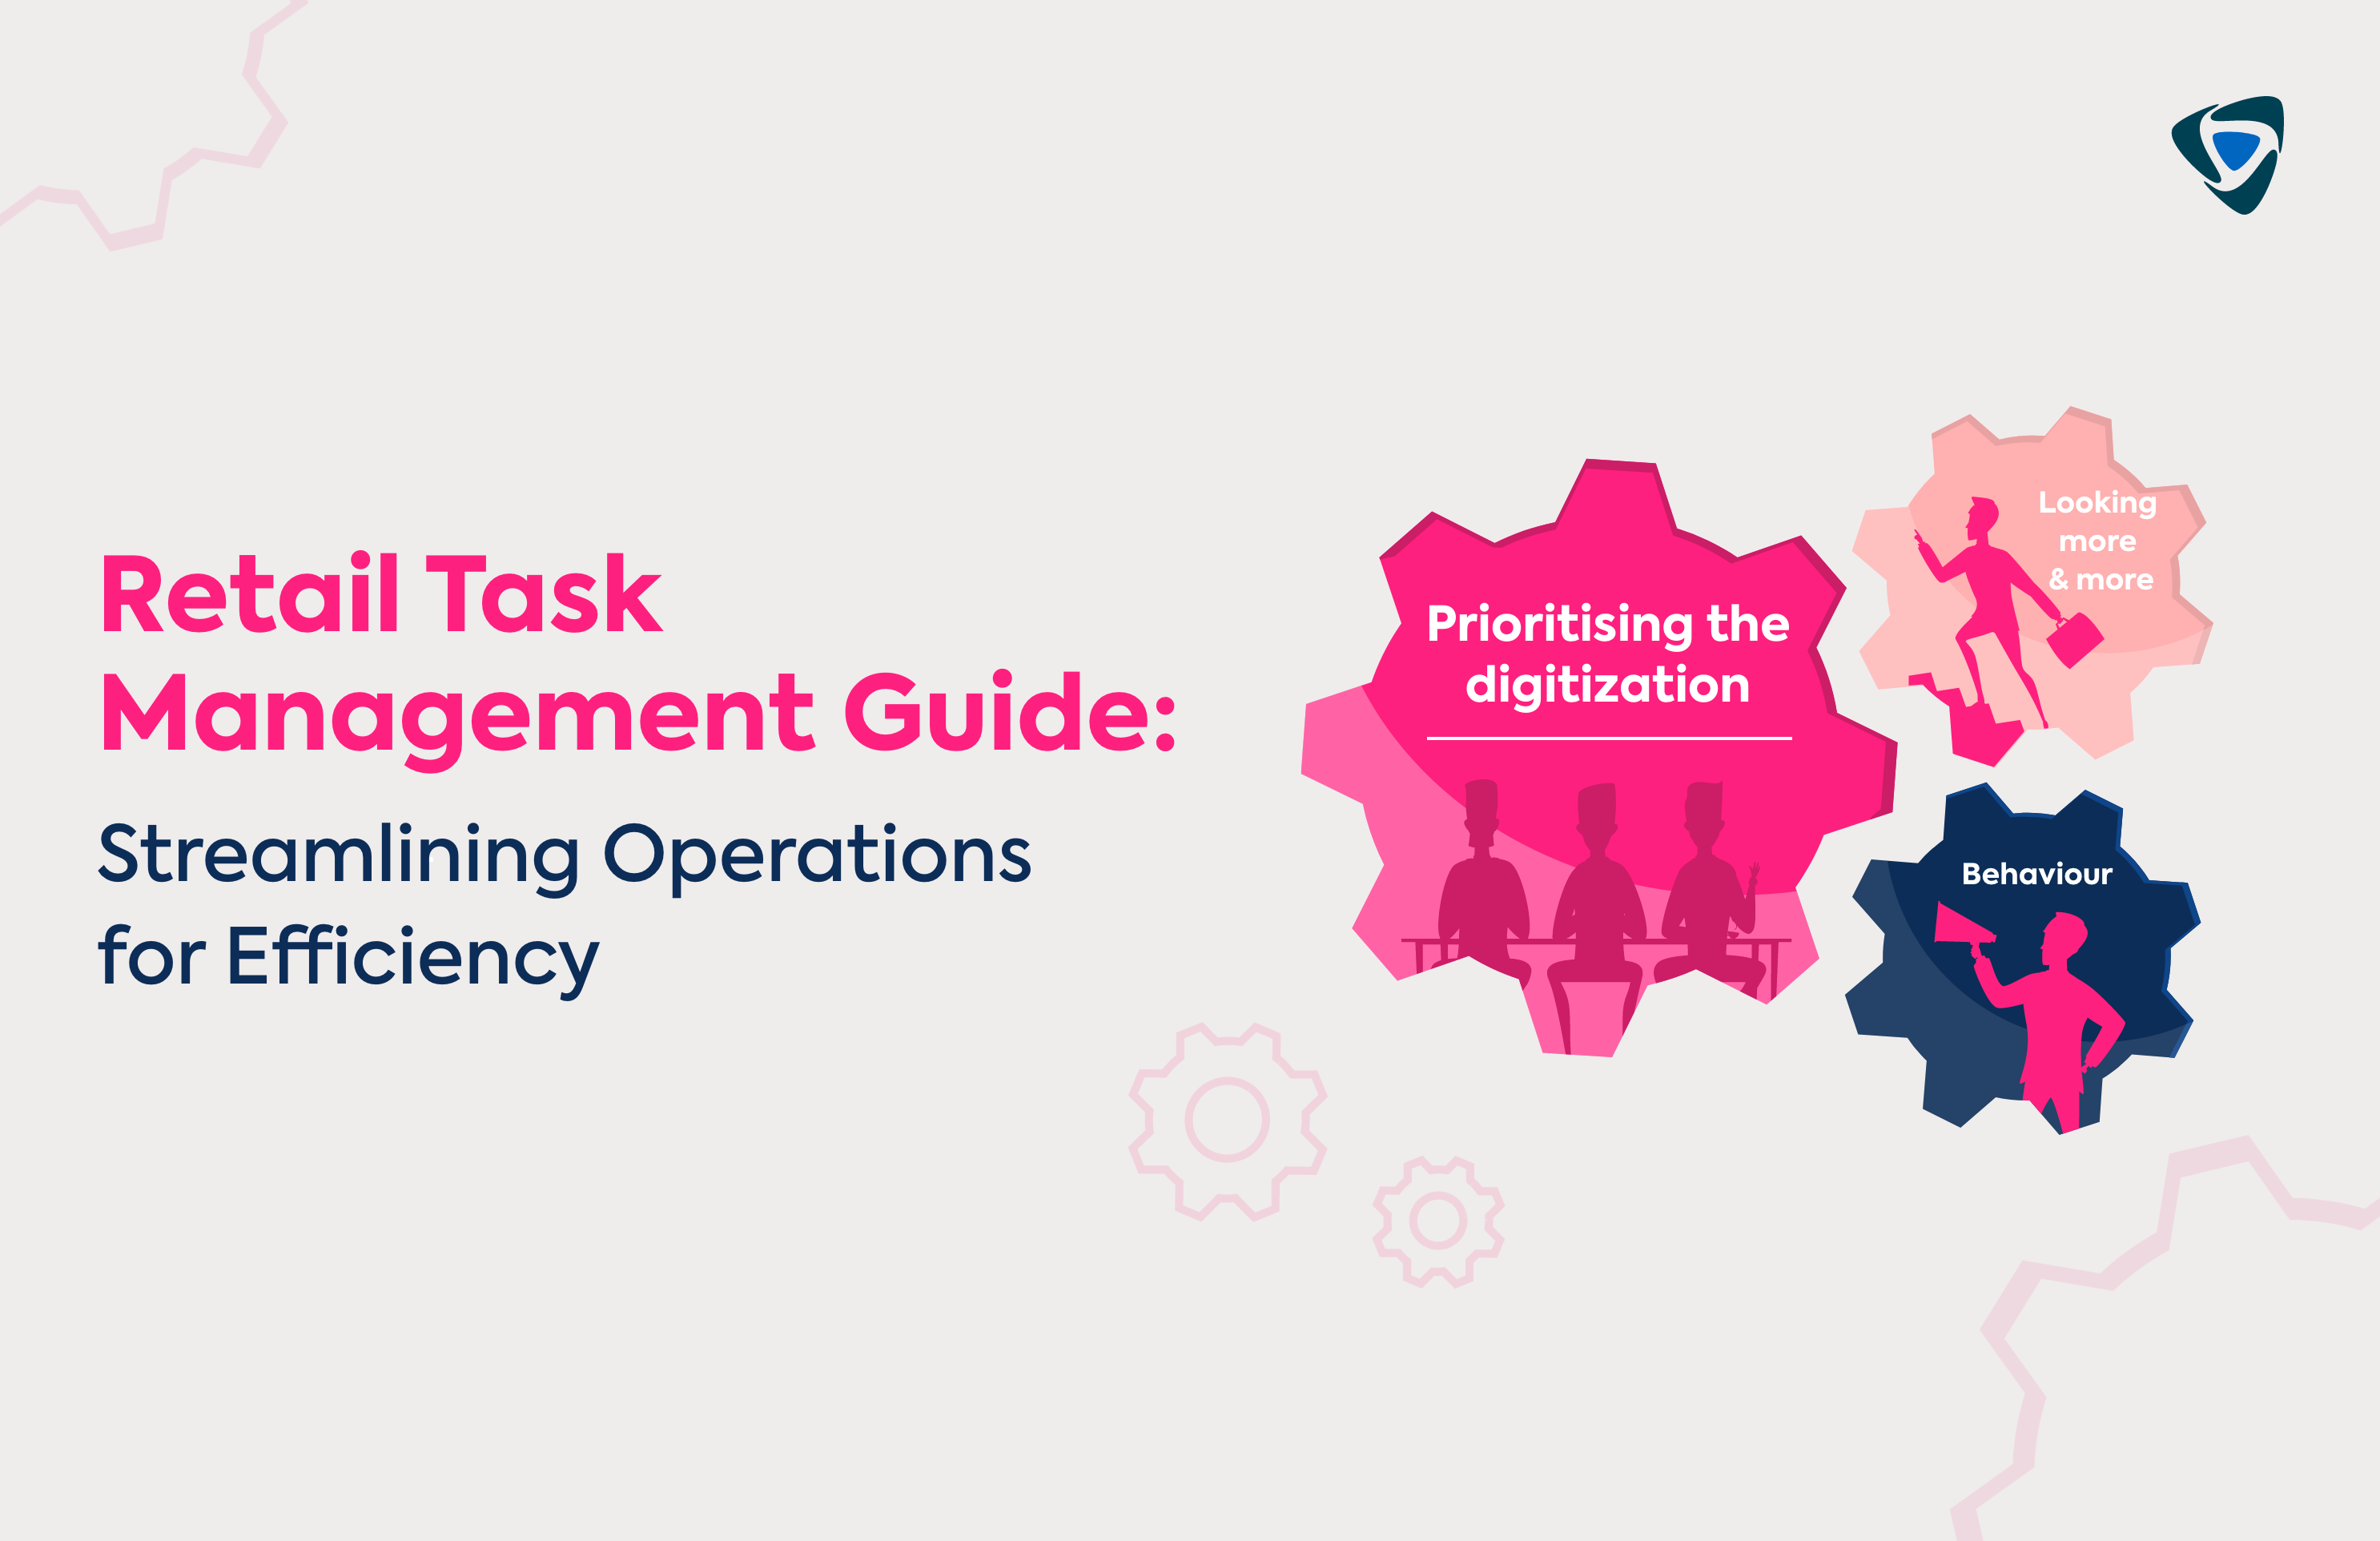 Retail Task Management Guide: Streamlining Operations for Efficiency